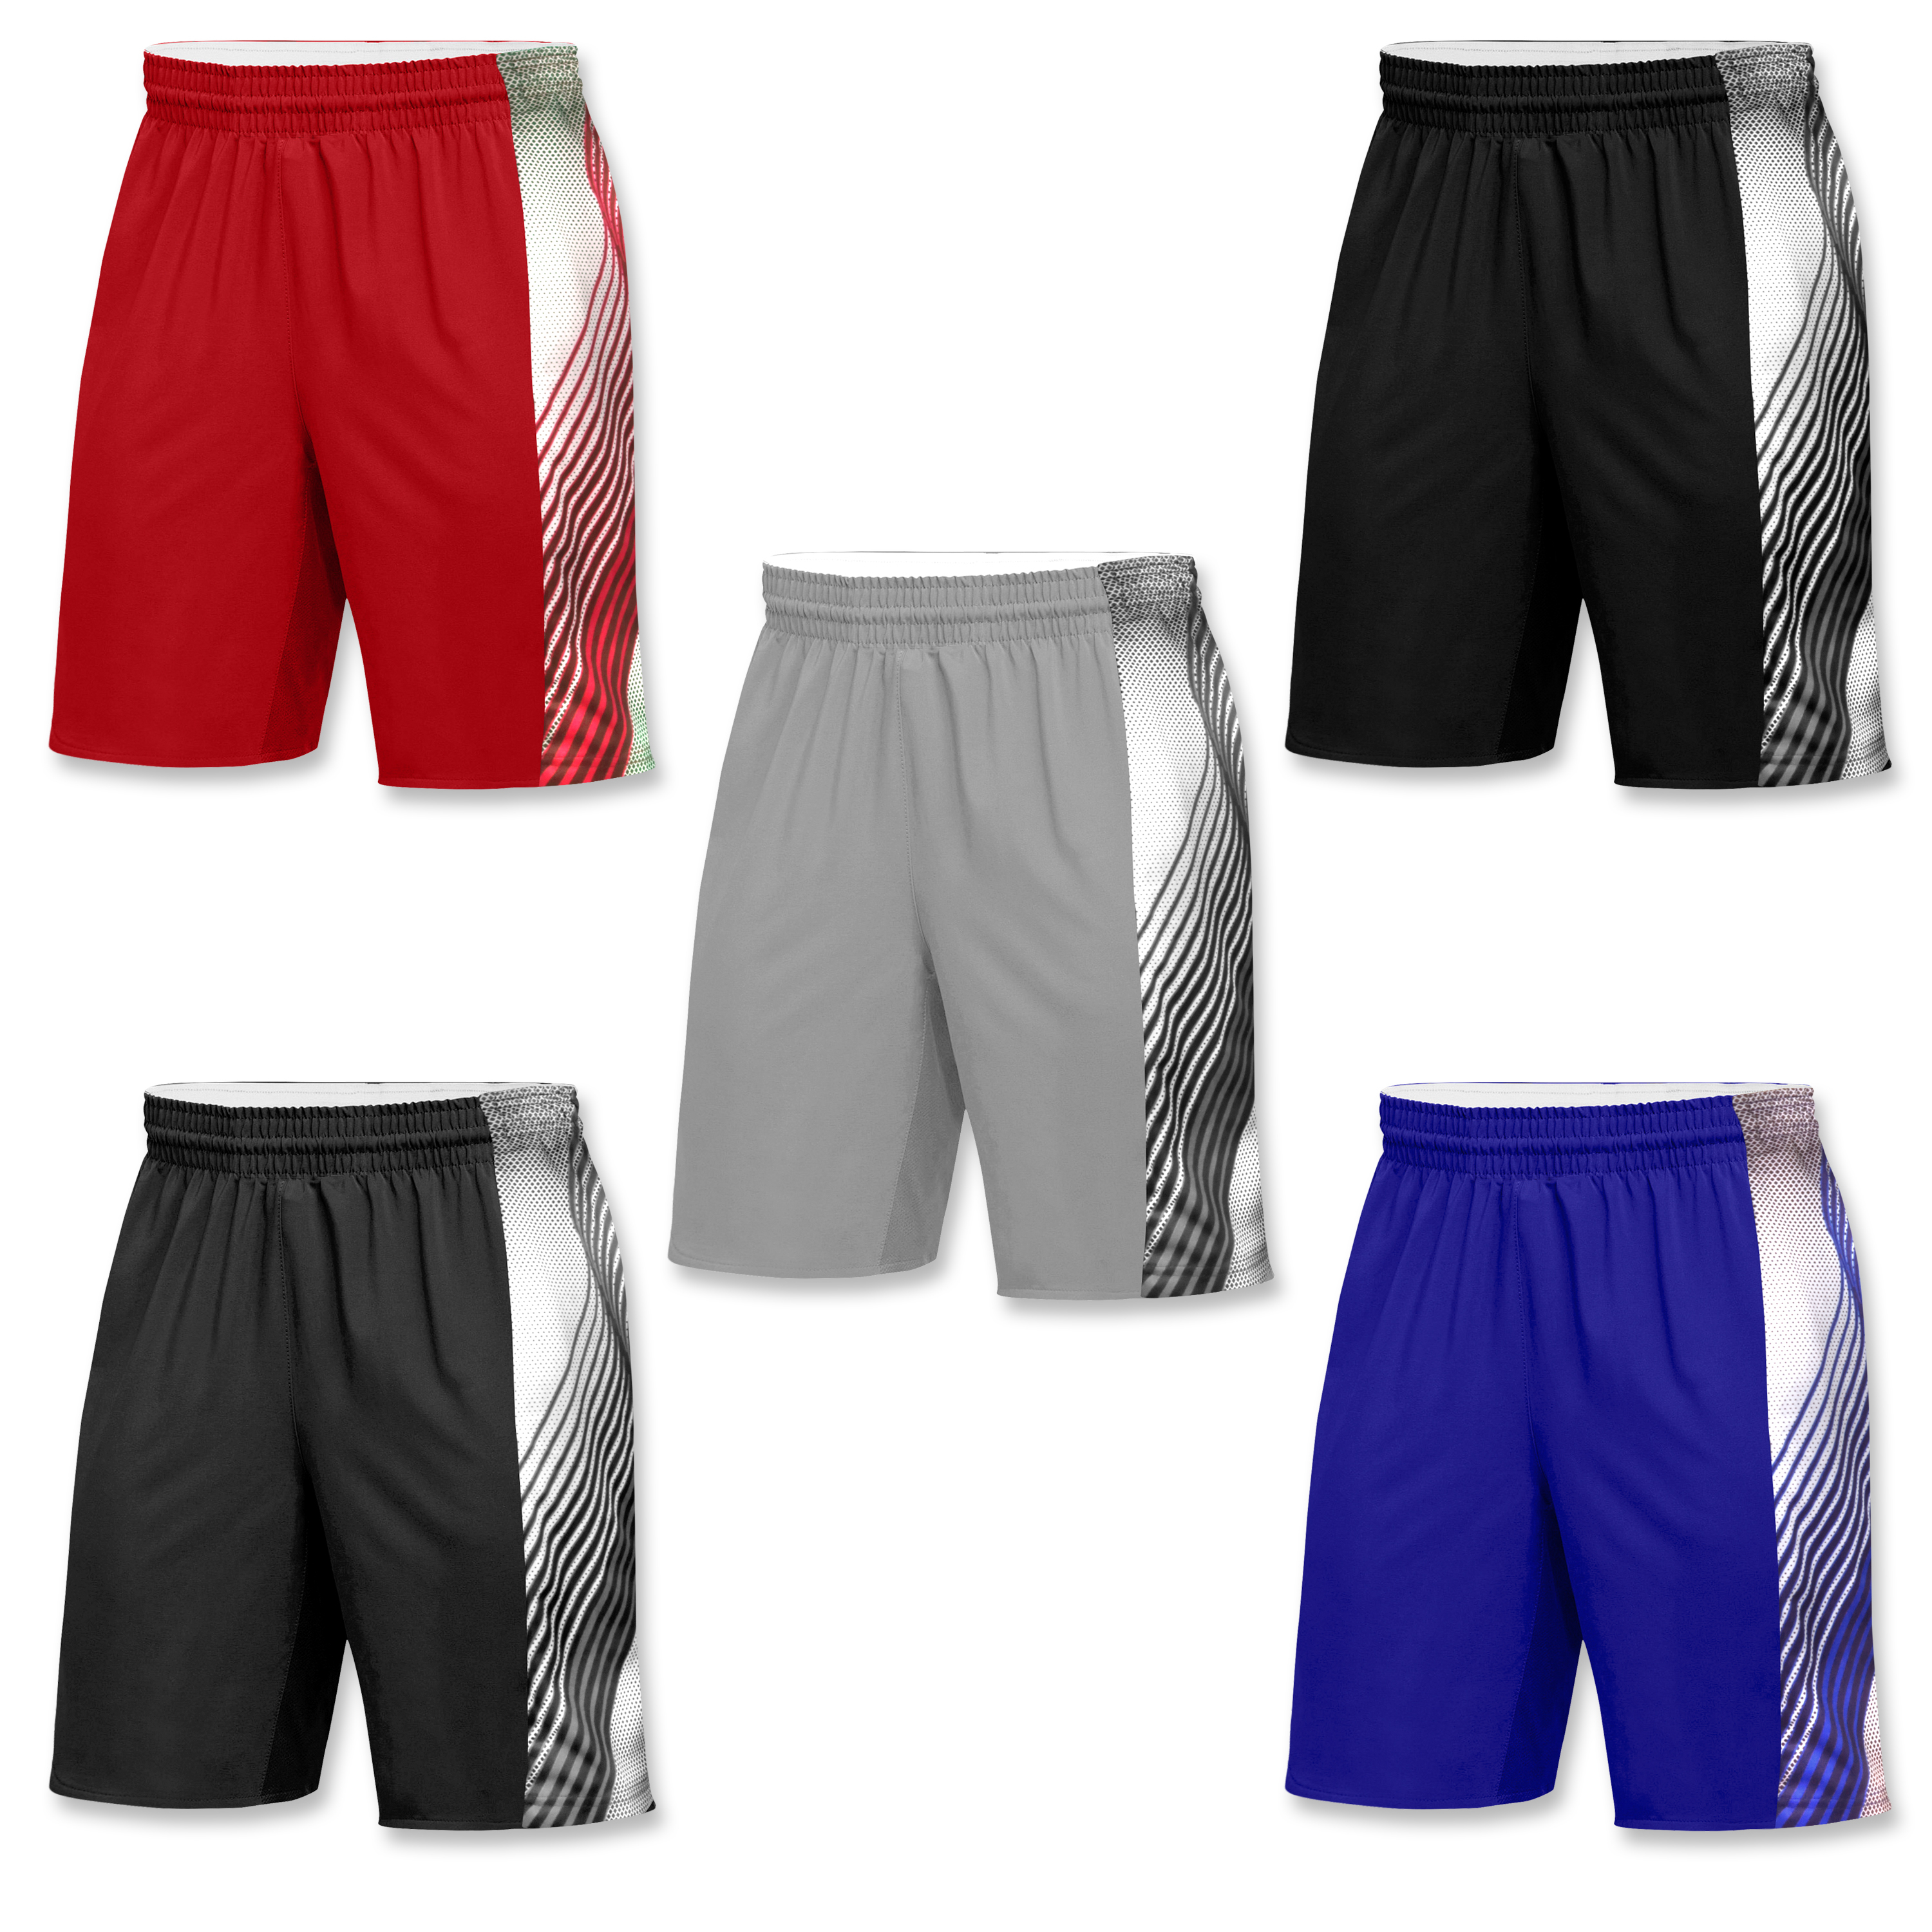 5-Pack Mystery Deal: Men's Active Athletic Performance Shorts - Large